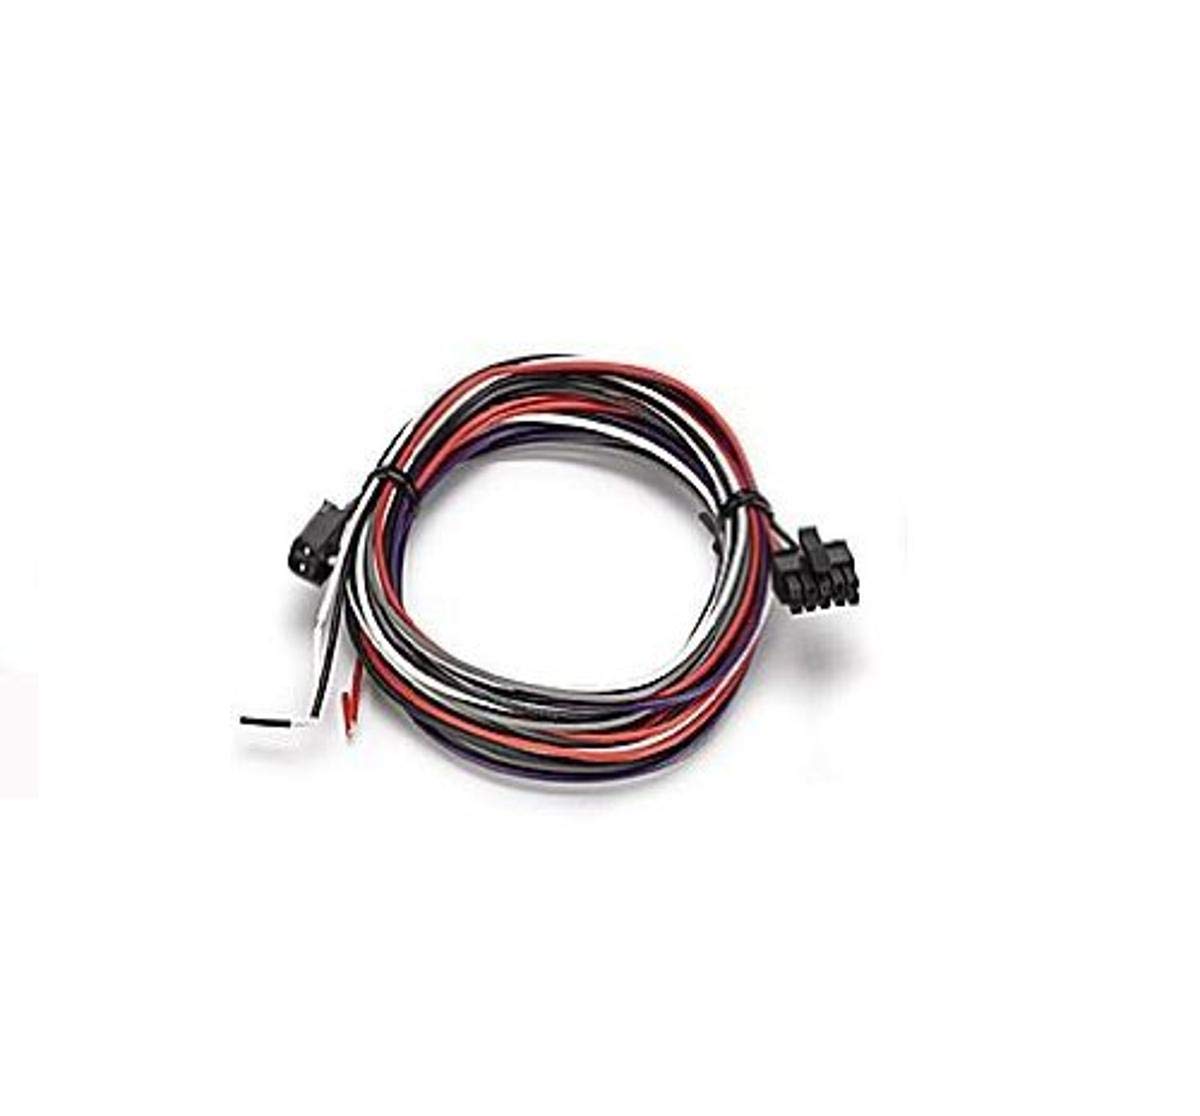 WIRING HARNESS, TEMPERATURE, FOR 52MM PRO STEPPER GAUGE